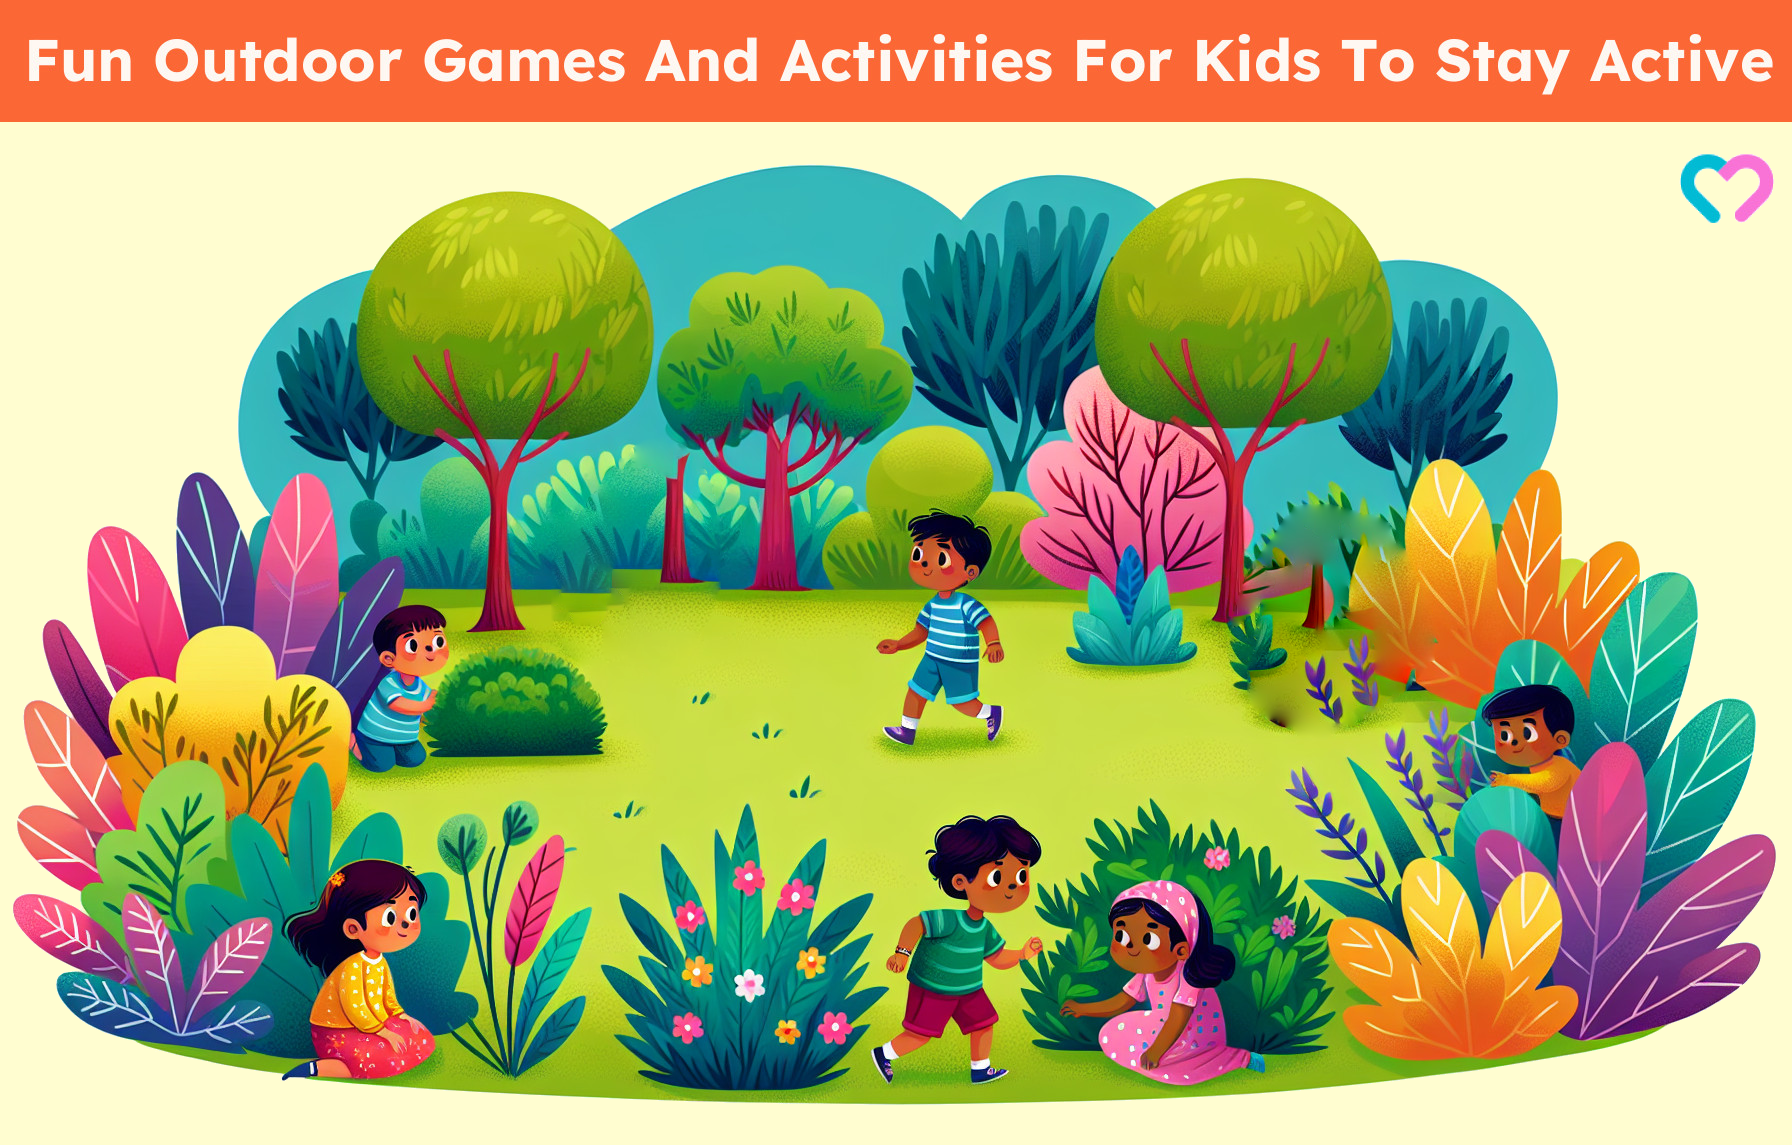 Outdoor Games And Activities For Kids_illustration